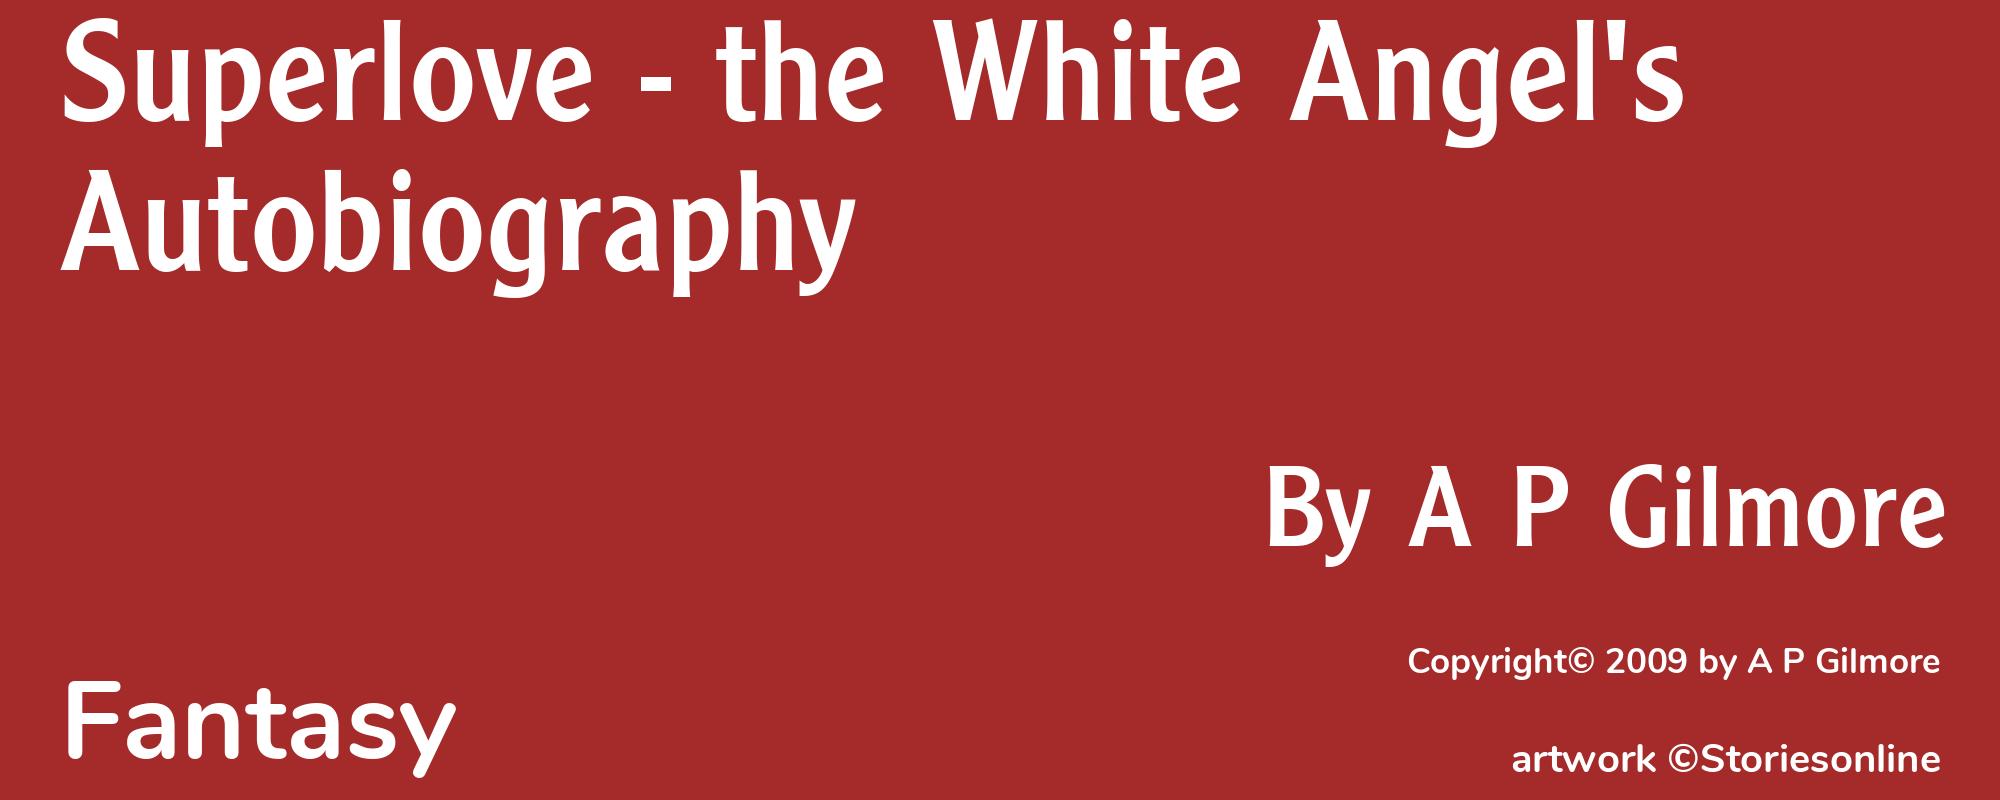 Superlove - the White Angel's Autobiography - Cover